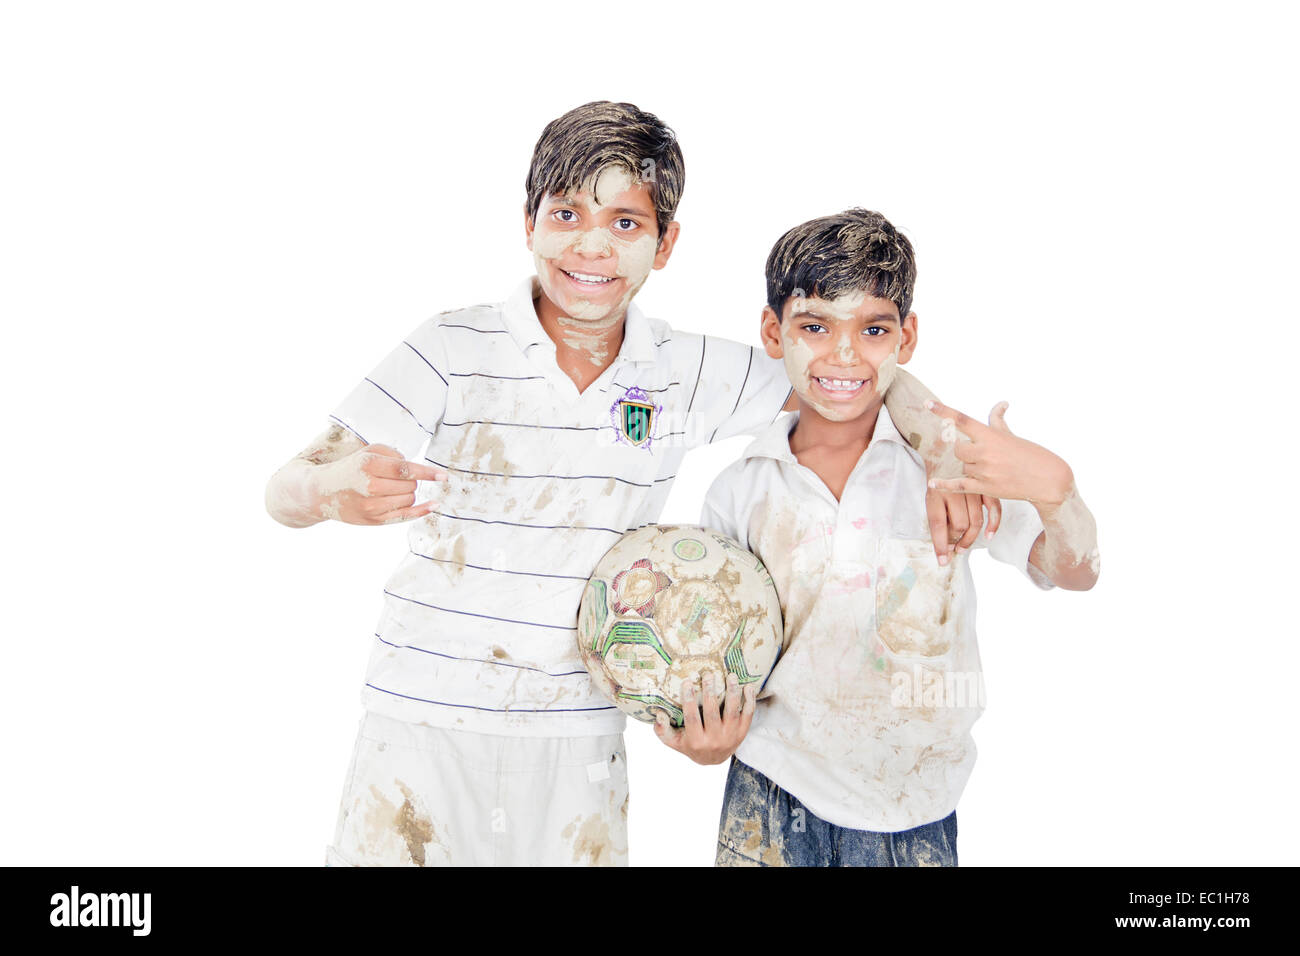 2 indans kids boys Friends Playing Football Hands Gesturing Stock Photo